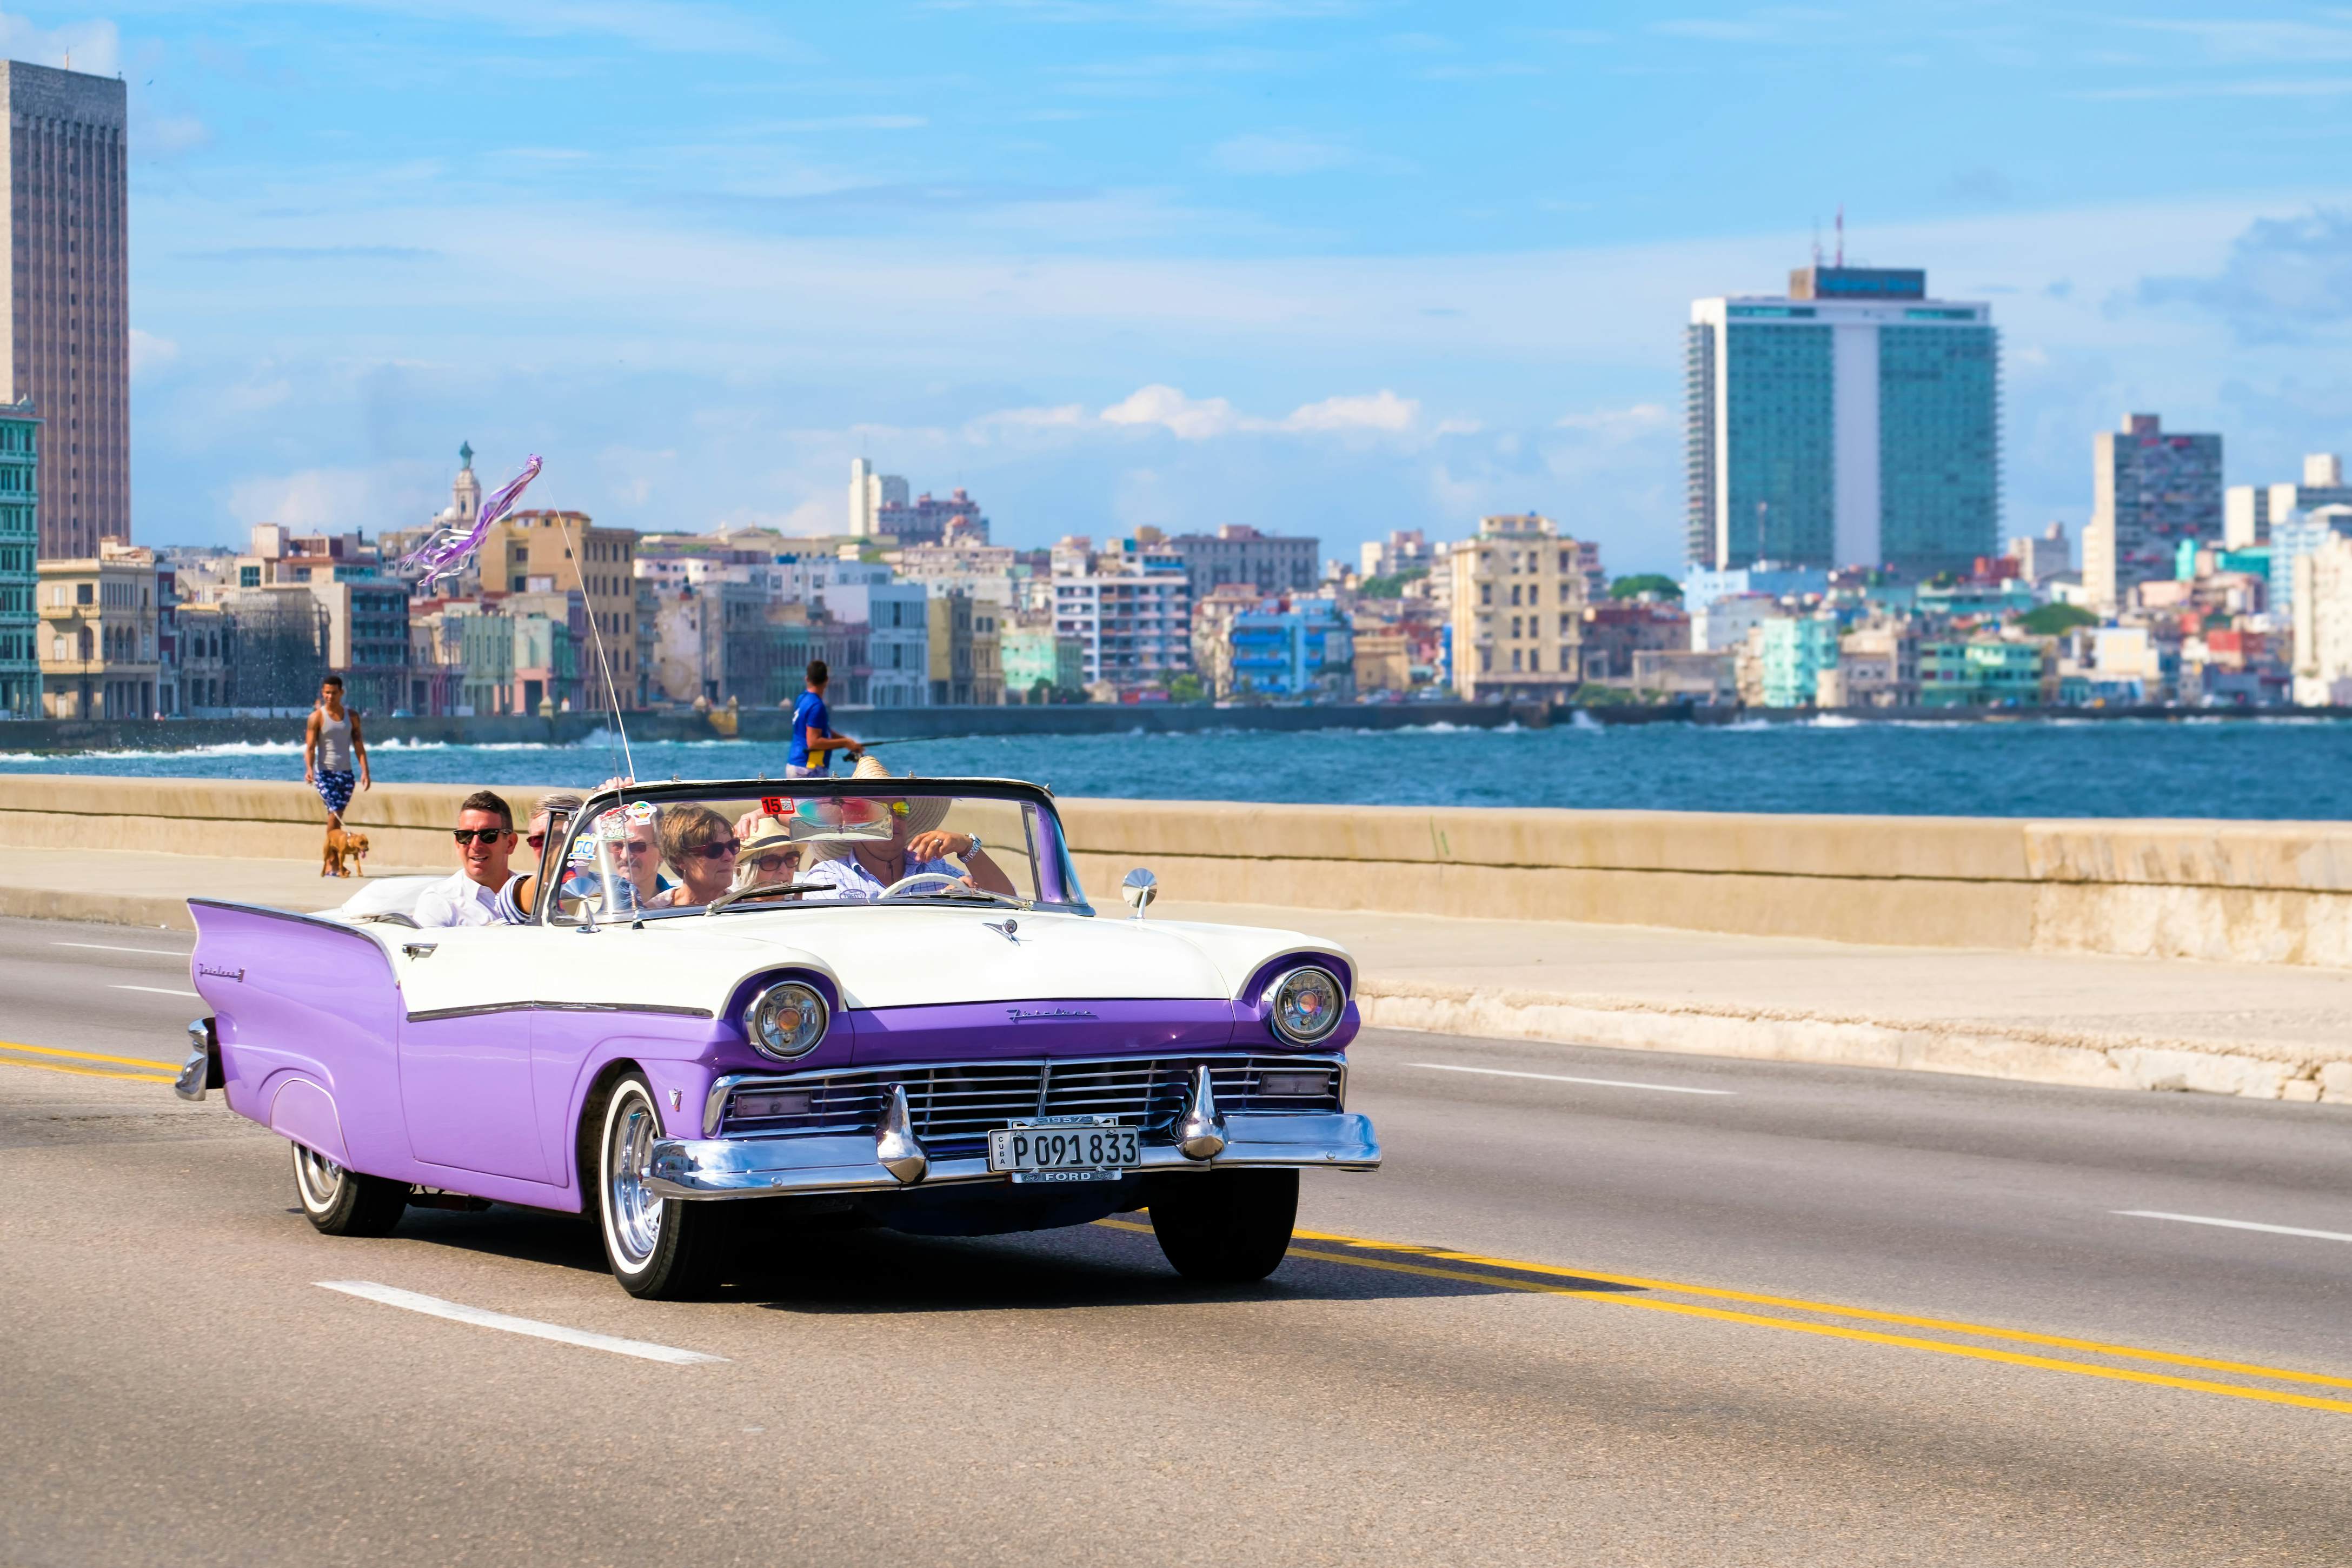 travel to cuba 2022